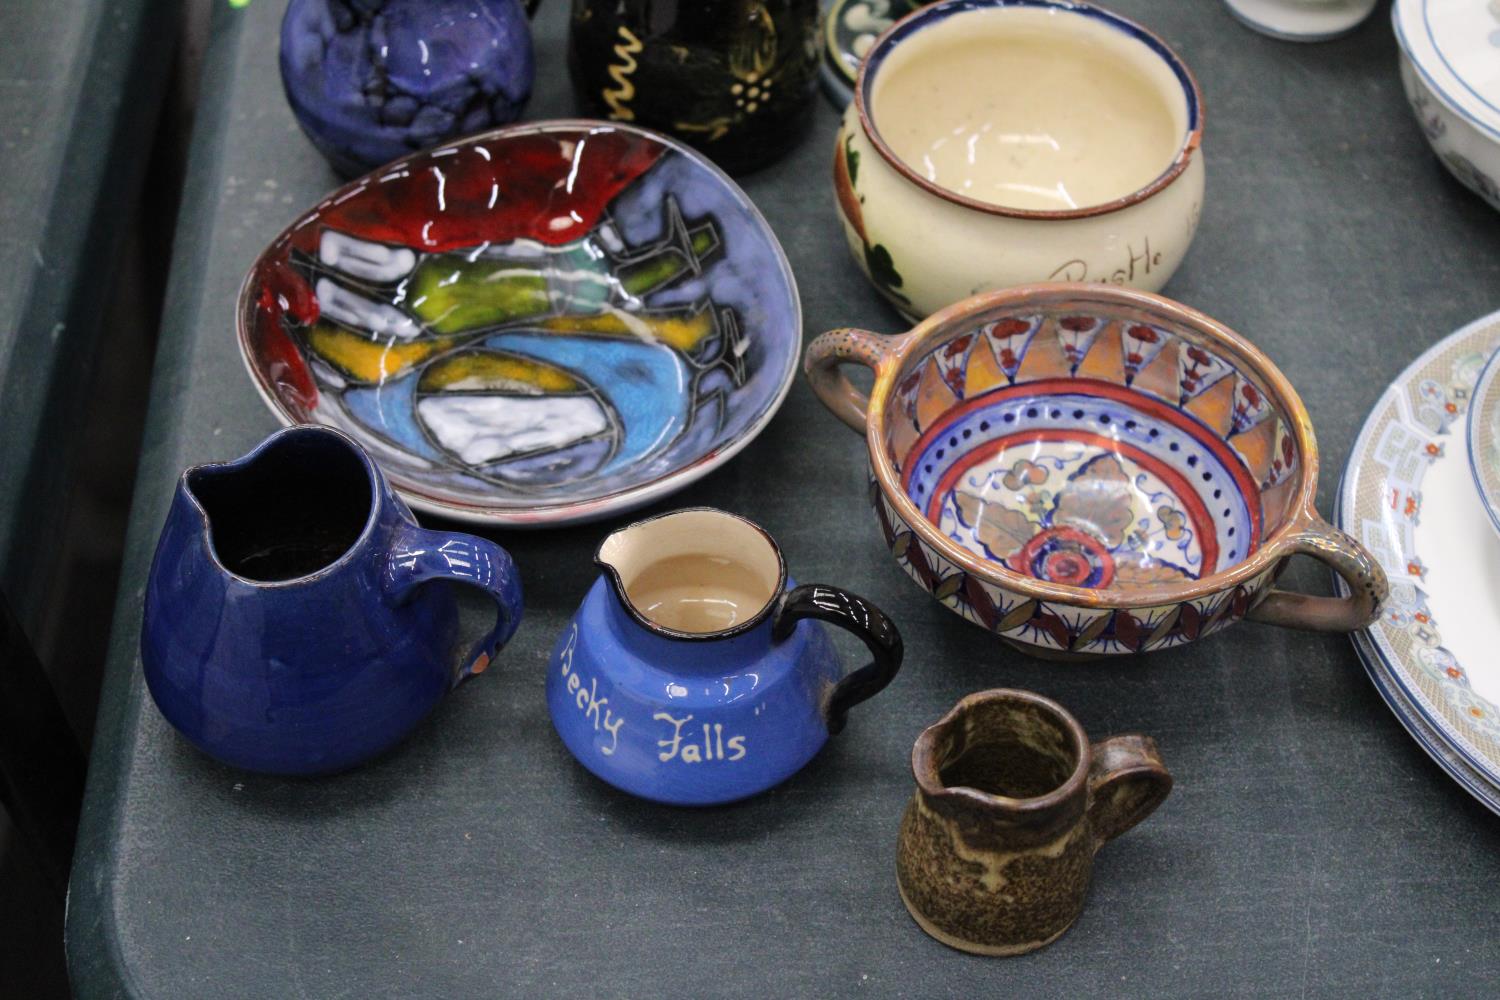 A QUANTITY OF STUDIO POTTERY TO INCLUDE A TEAPOT, CANDLE HOLDER, BOWLS ETC - SOME WITH MARKS TO - Image 4 of 6